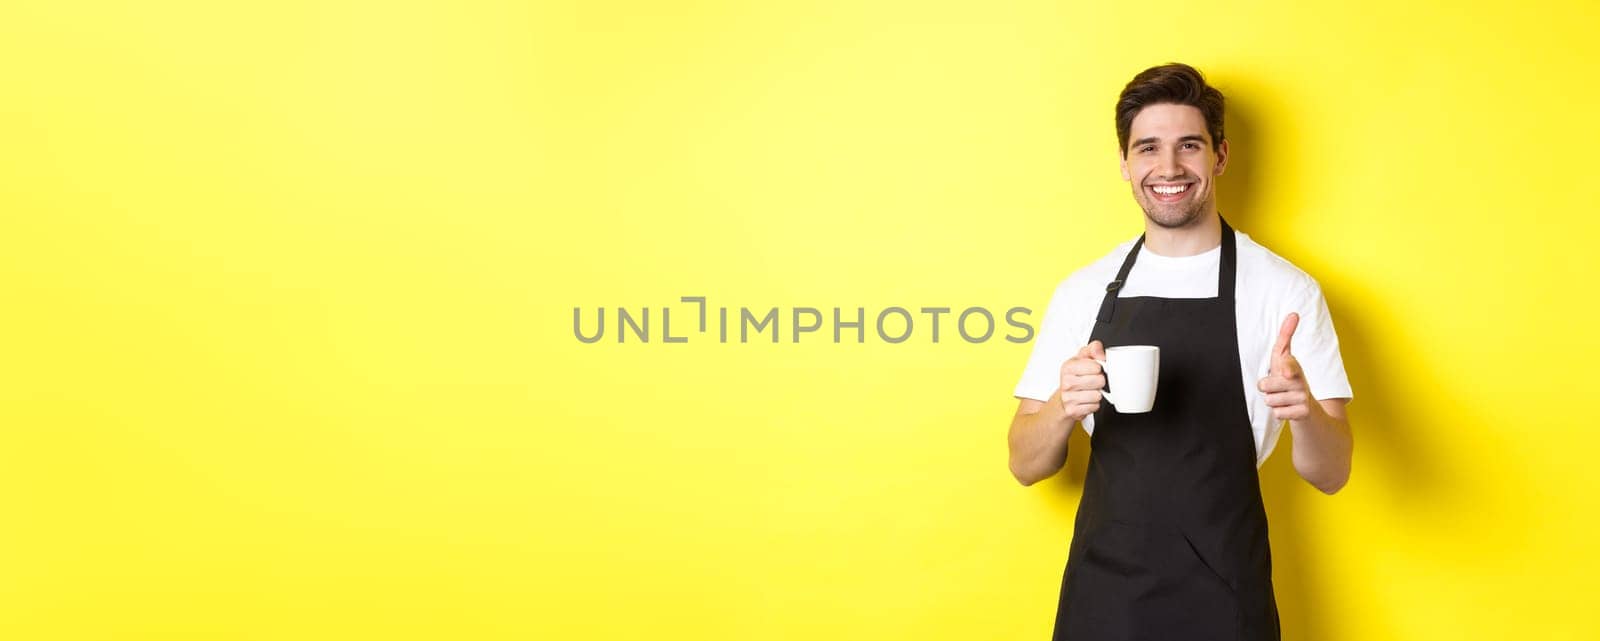 Barista bringing coffee and pointing finger gun at camera, standing in black apron against yellow background.